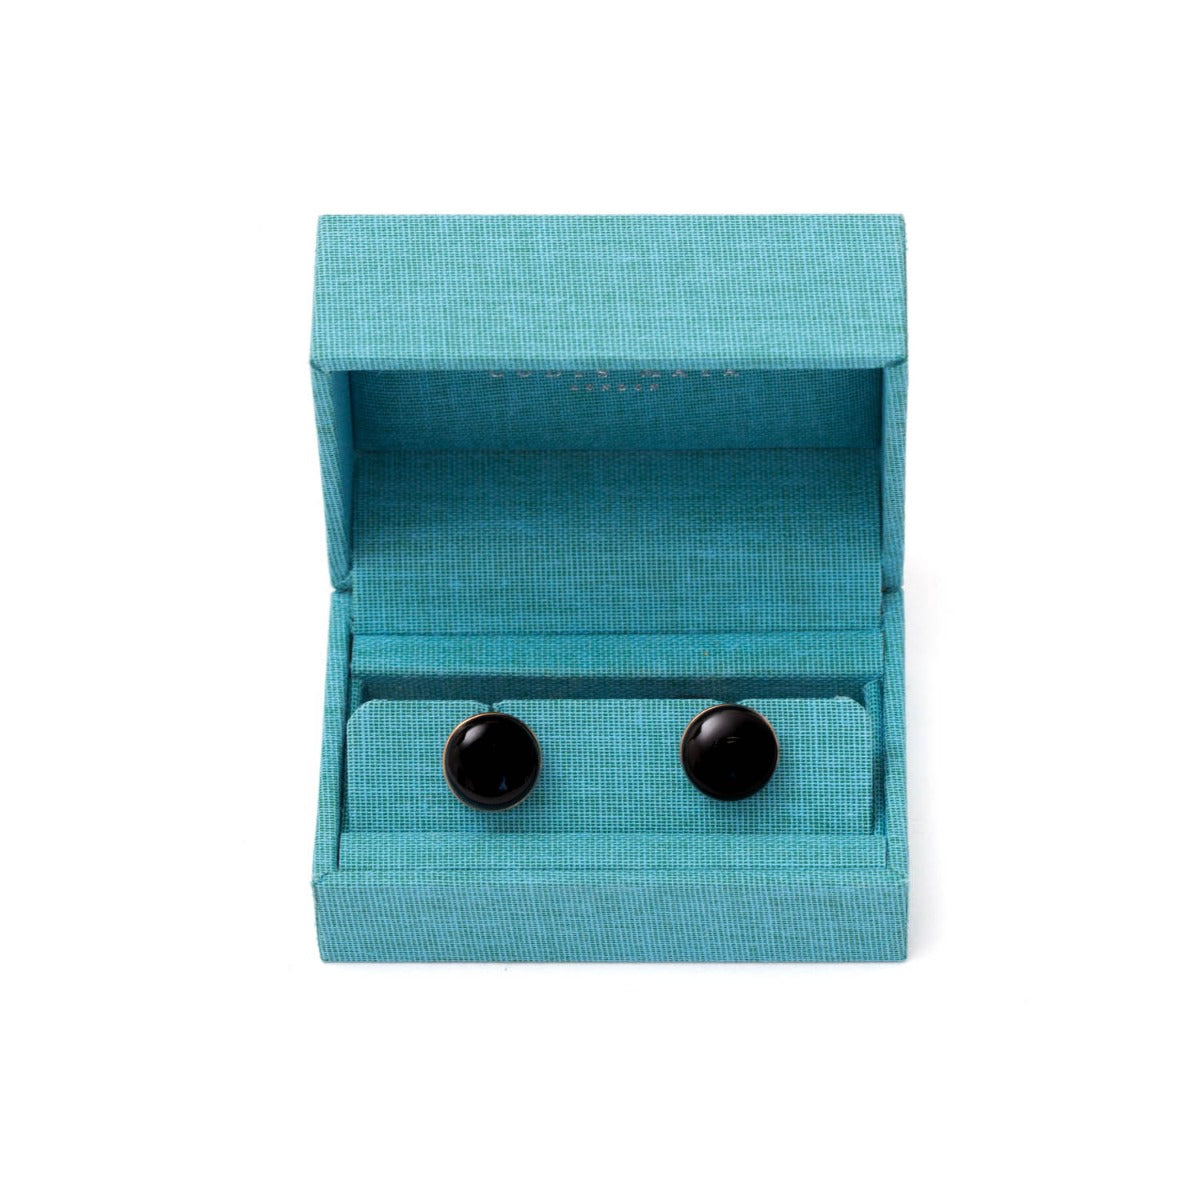 A pair of Onyx Stone Gold Capsule Cufflinks from KirbyAllison.com in a blue box.